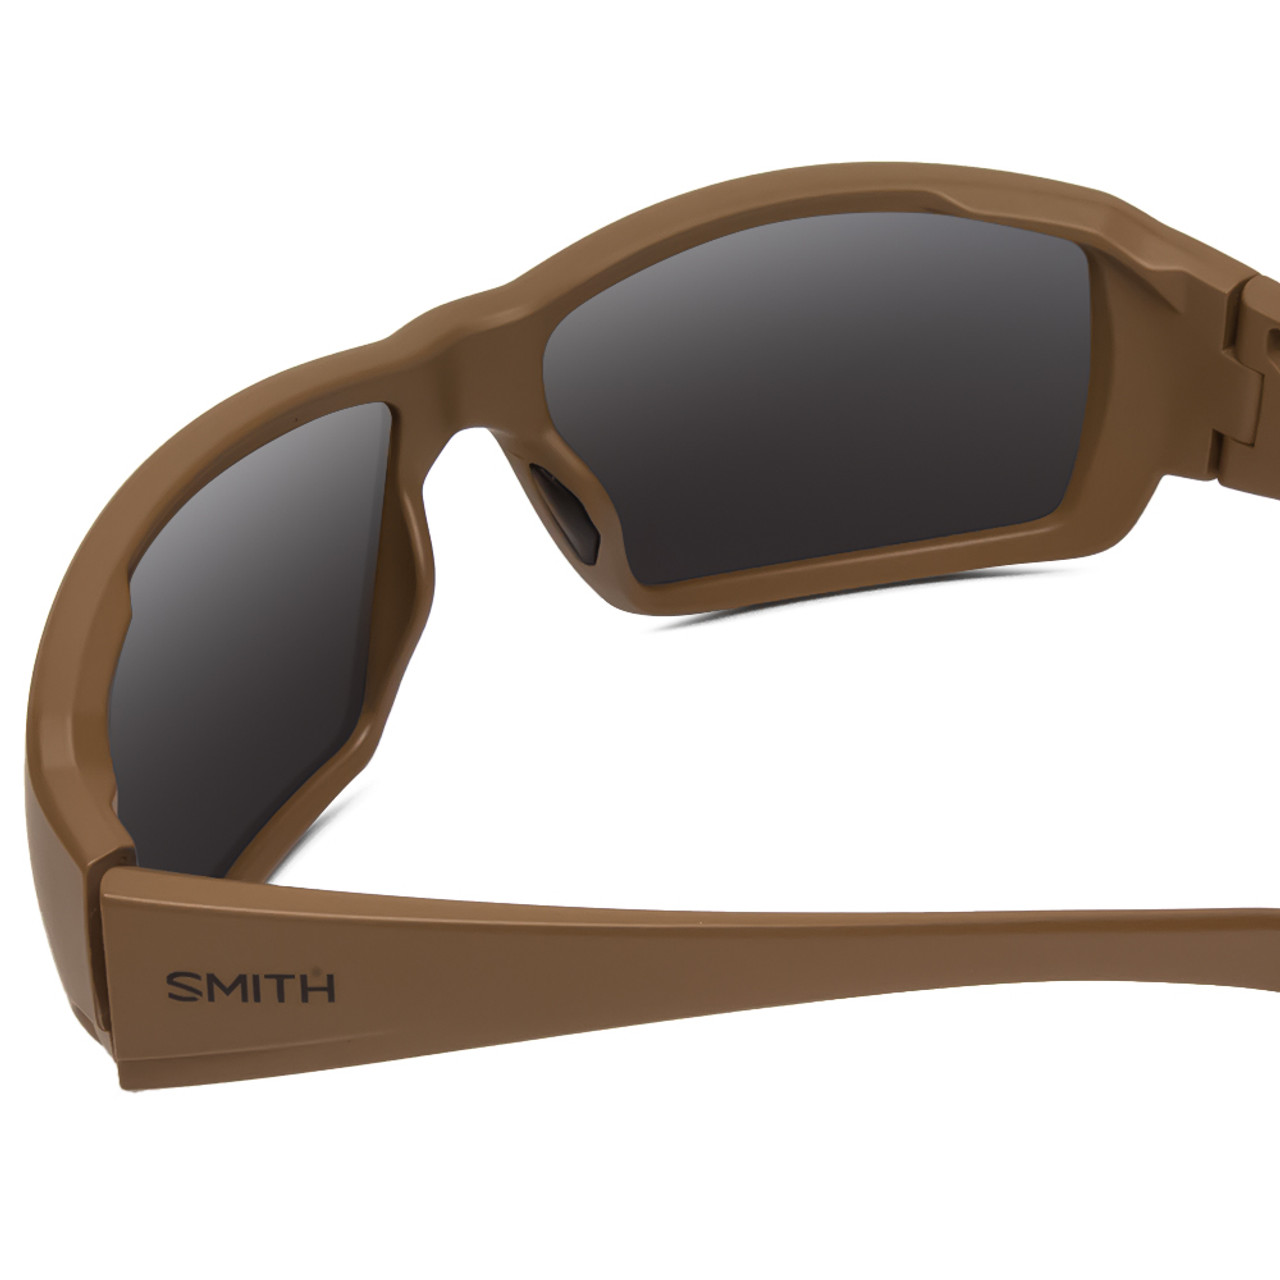 Close Up View of Smith Operators Choice Elite Unisex Wrap Sunglasses in Tan 499 Brown/Gray 62 mm